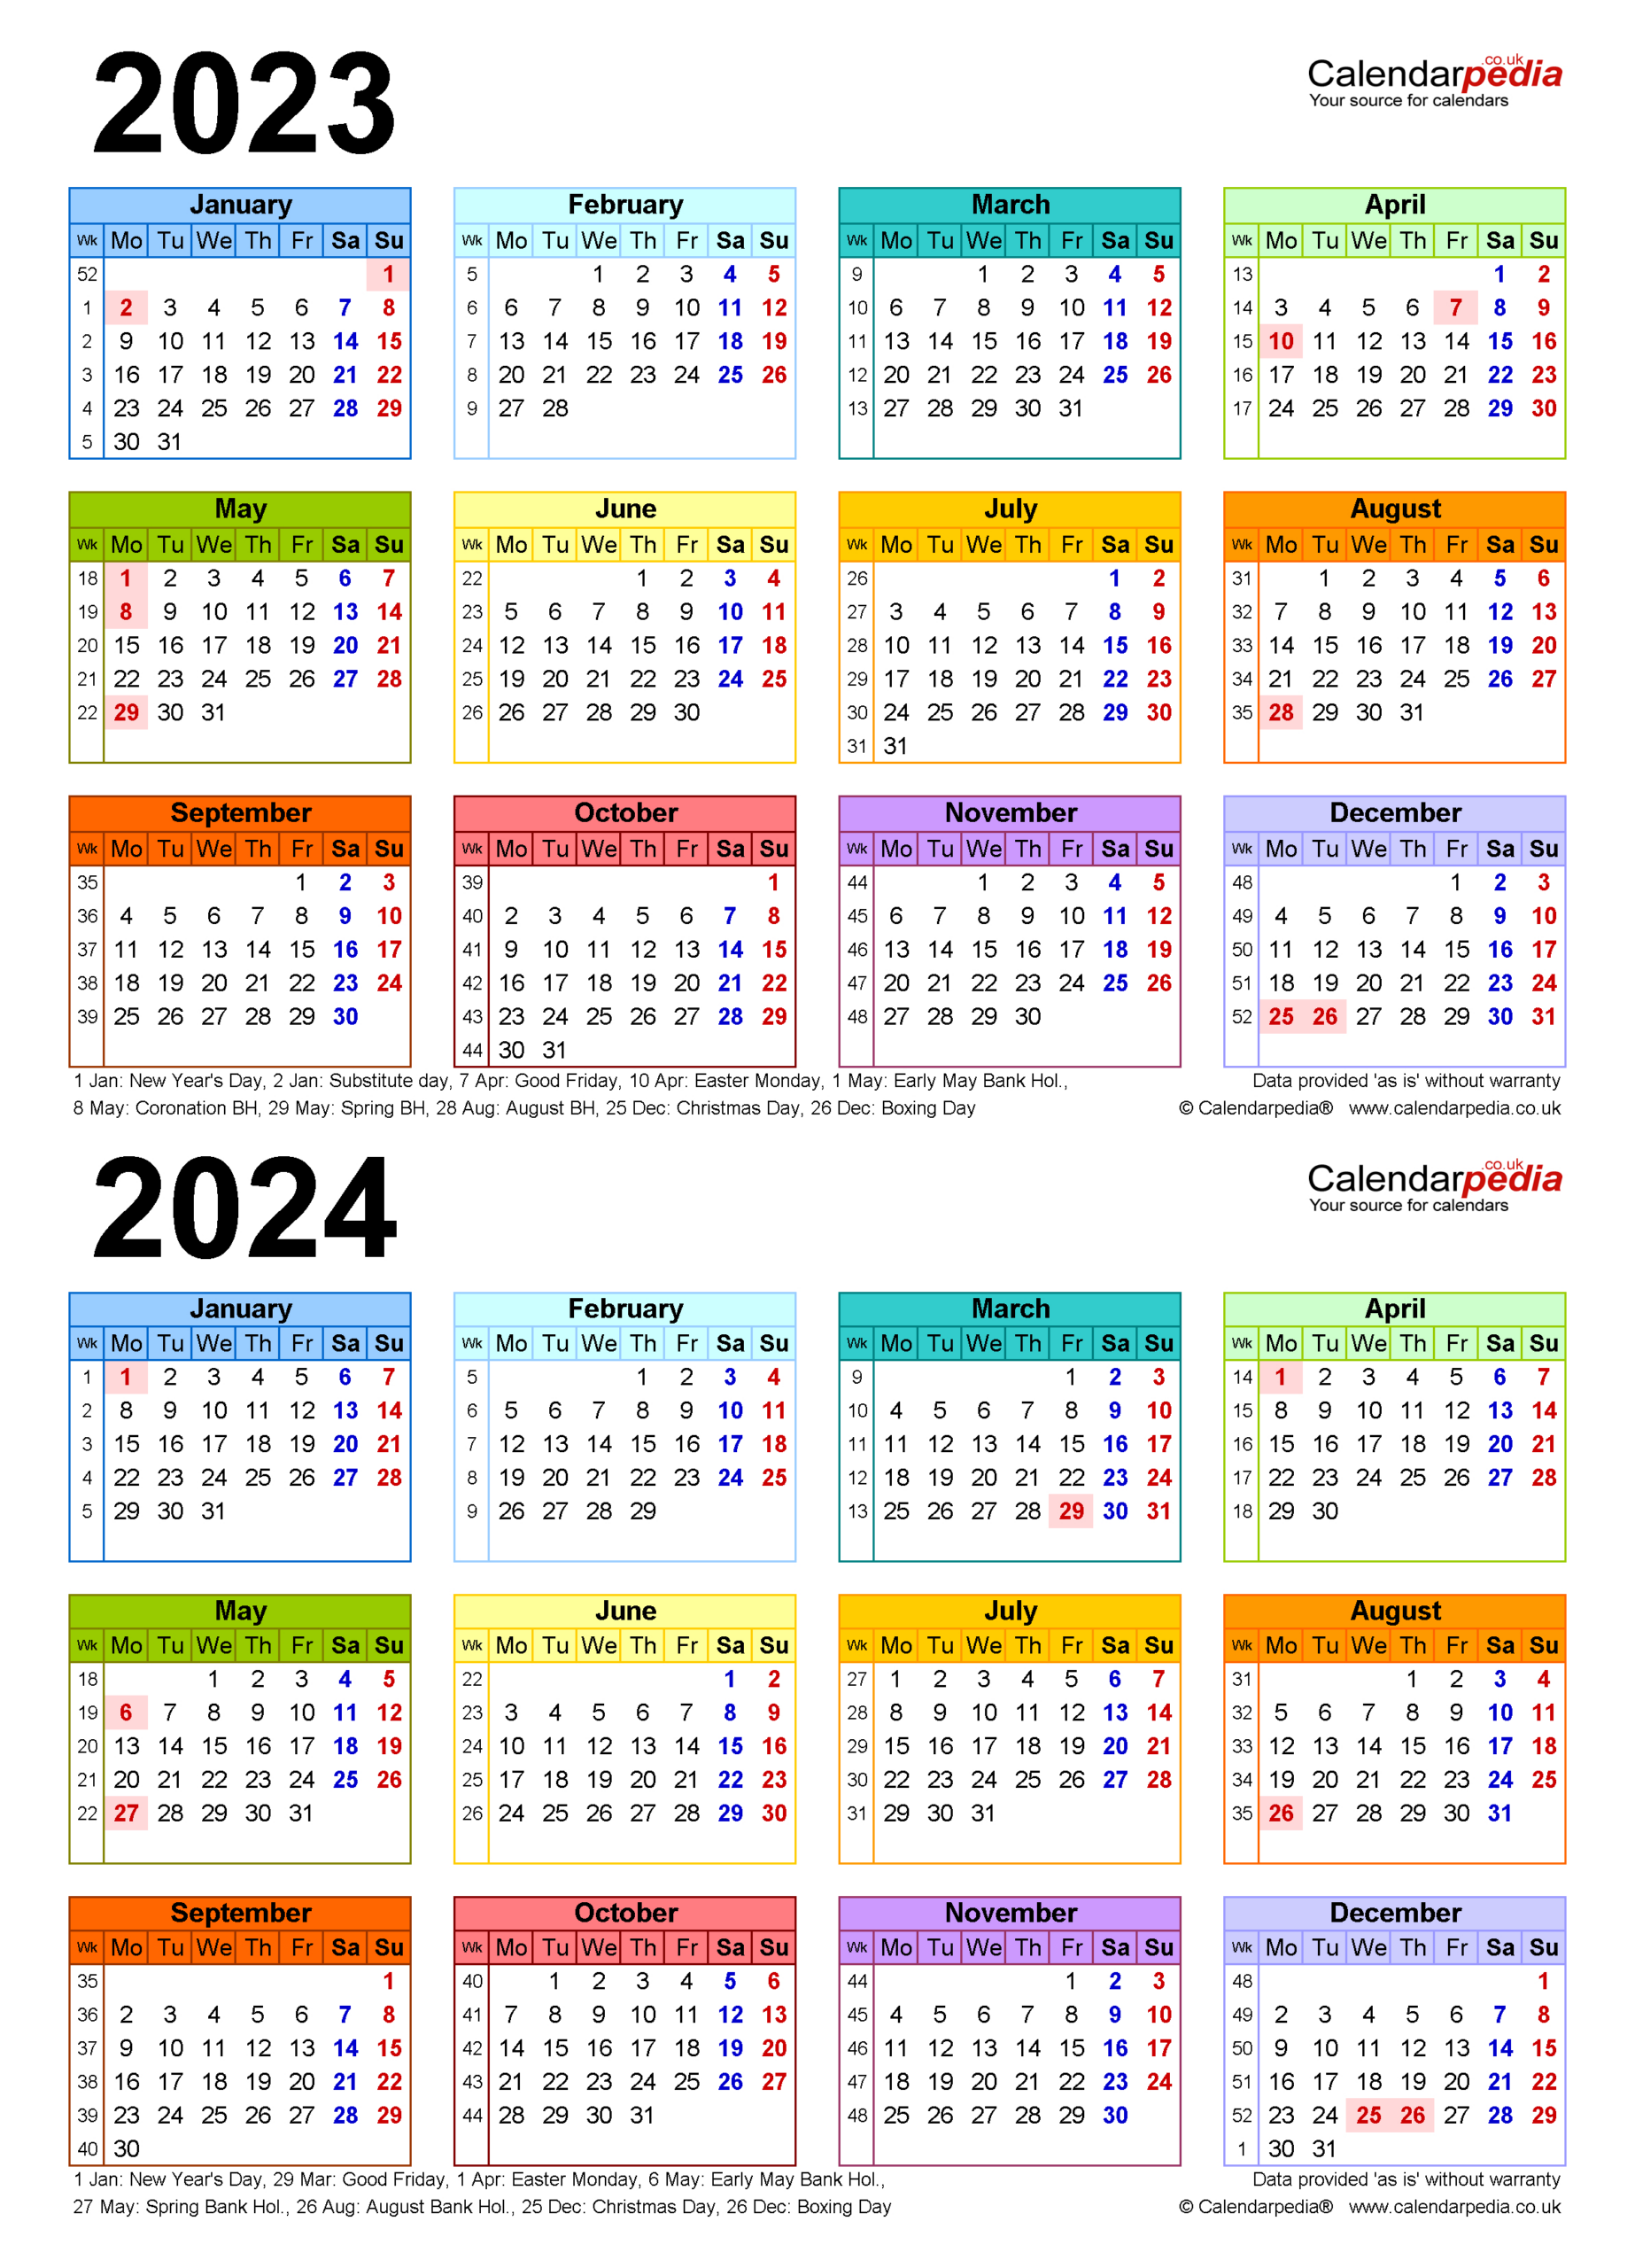 Two Year Calendars For 2023 &Amp;Amp;Amp; 2024 (Uk) For Pdf | Yearly Calendar 2023 And 2024